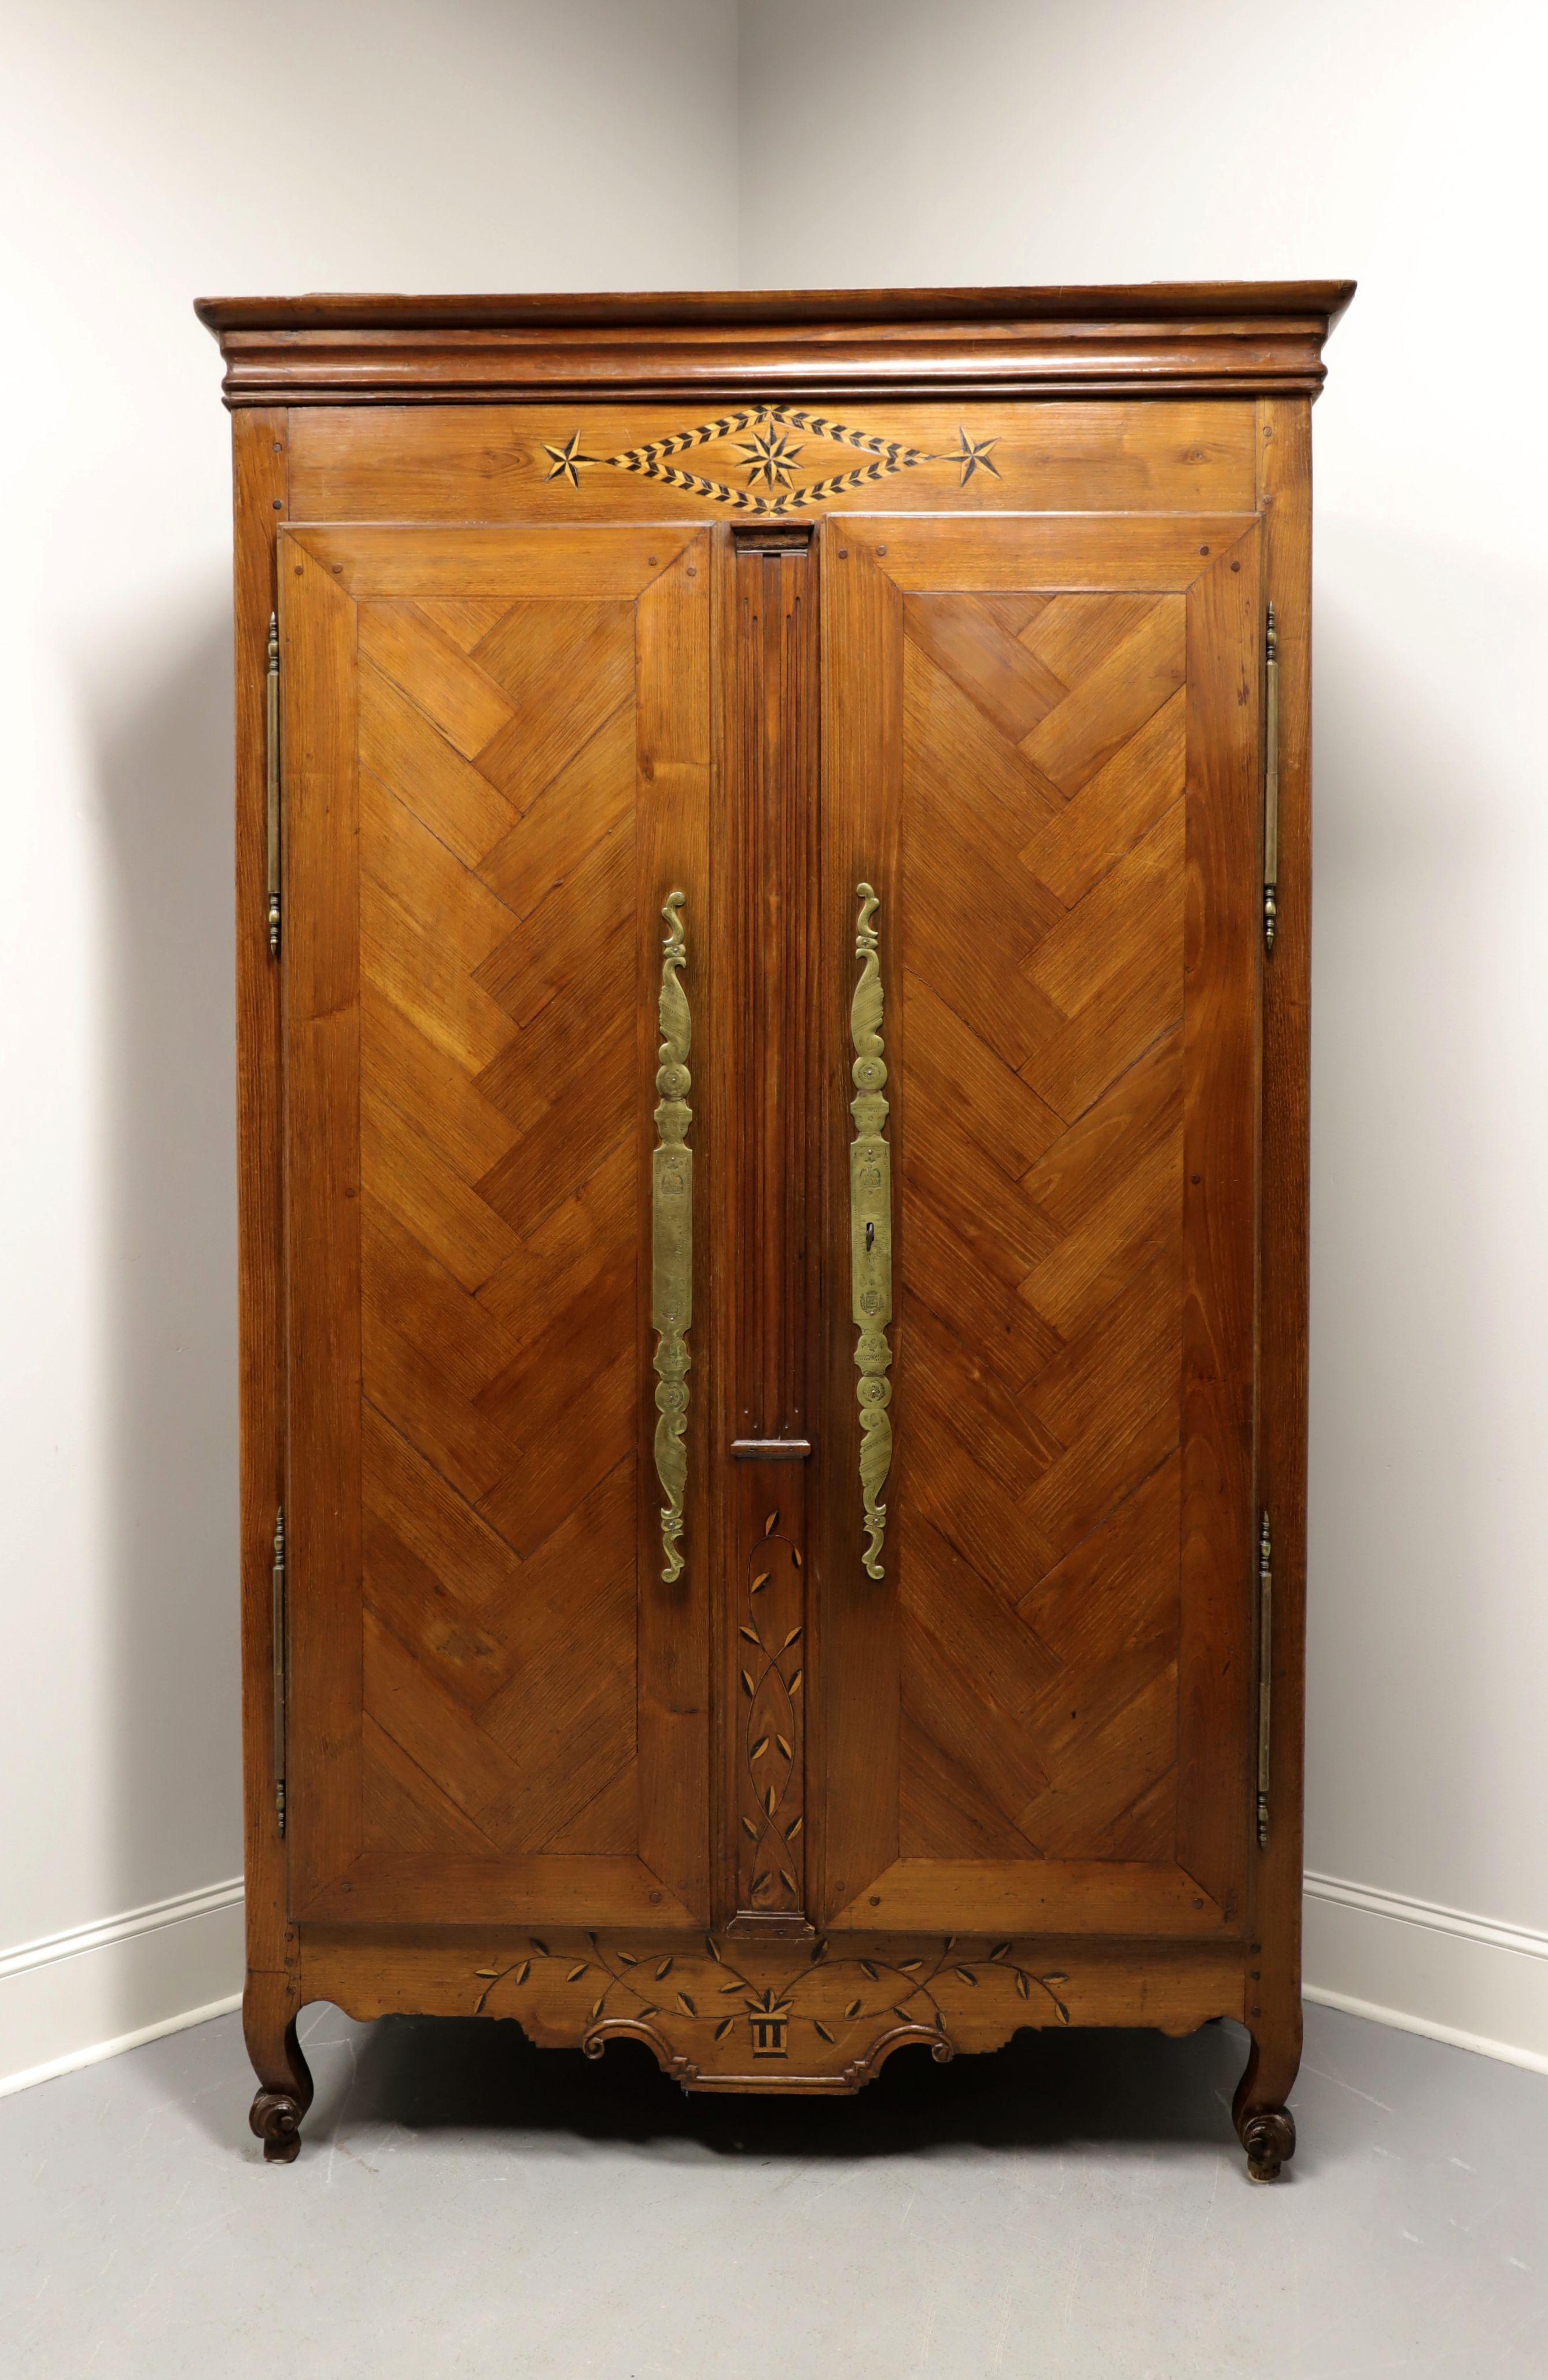 An antique French Country Louis XV style armoire, unbranded, from the 1700's. Handmade of walnut with brass hardware. Features crown molding, lockable double doors with beautiful inlaid parquetry detail, marquetry design to top, center panel &